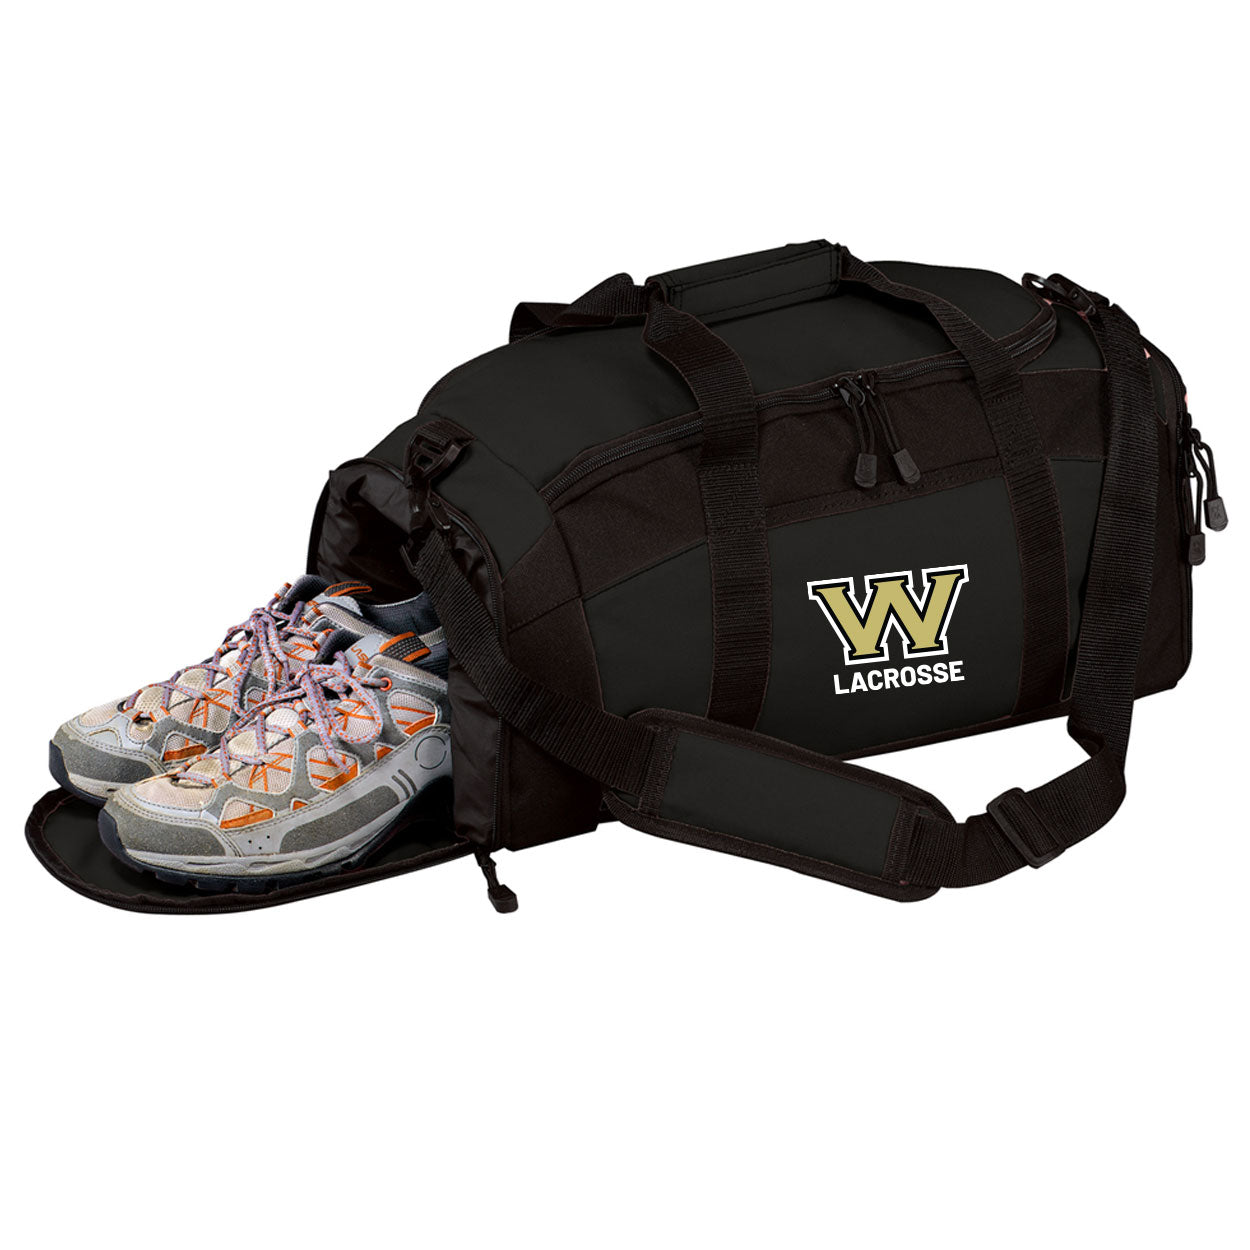 WESTVIEW LACROSSE EMBROIDERED PLAYER DUFFLE BAG